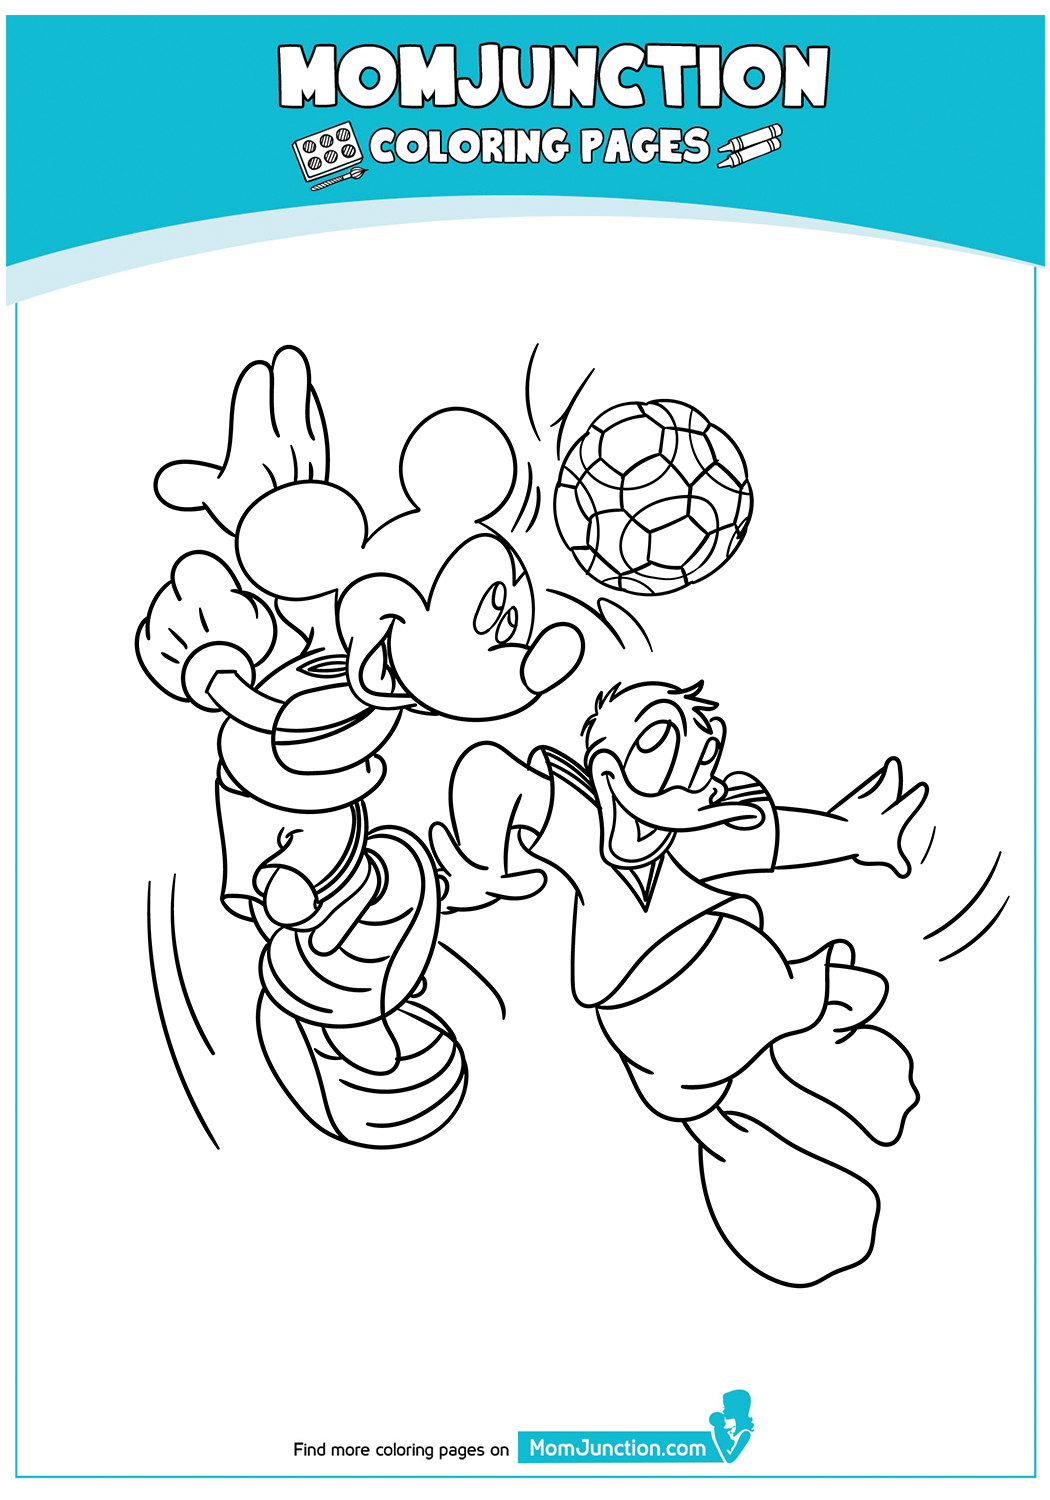 Mickey-and-Donald-Duck-Playing-Foot-Ball-17